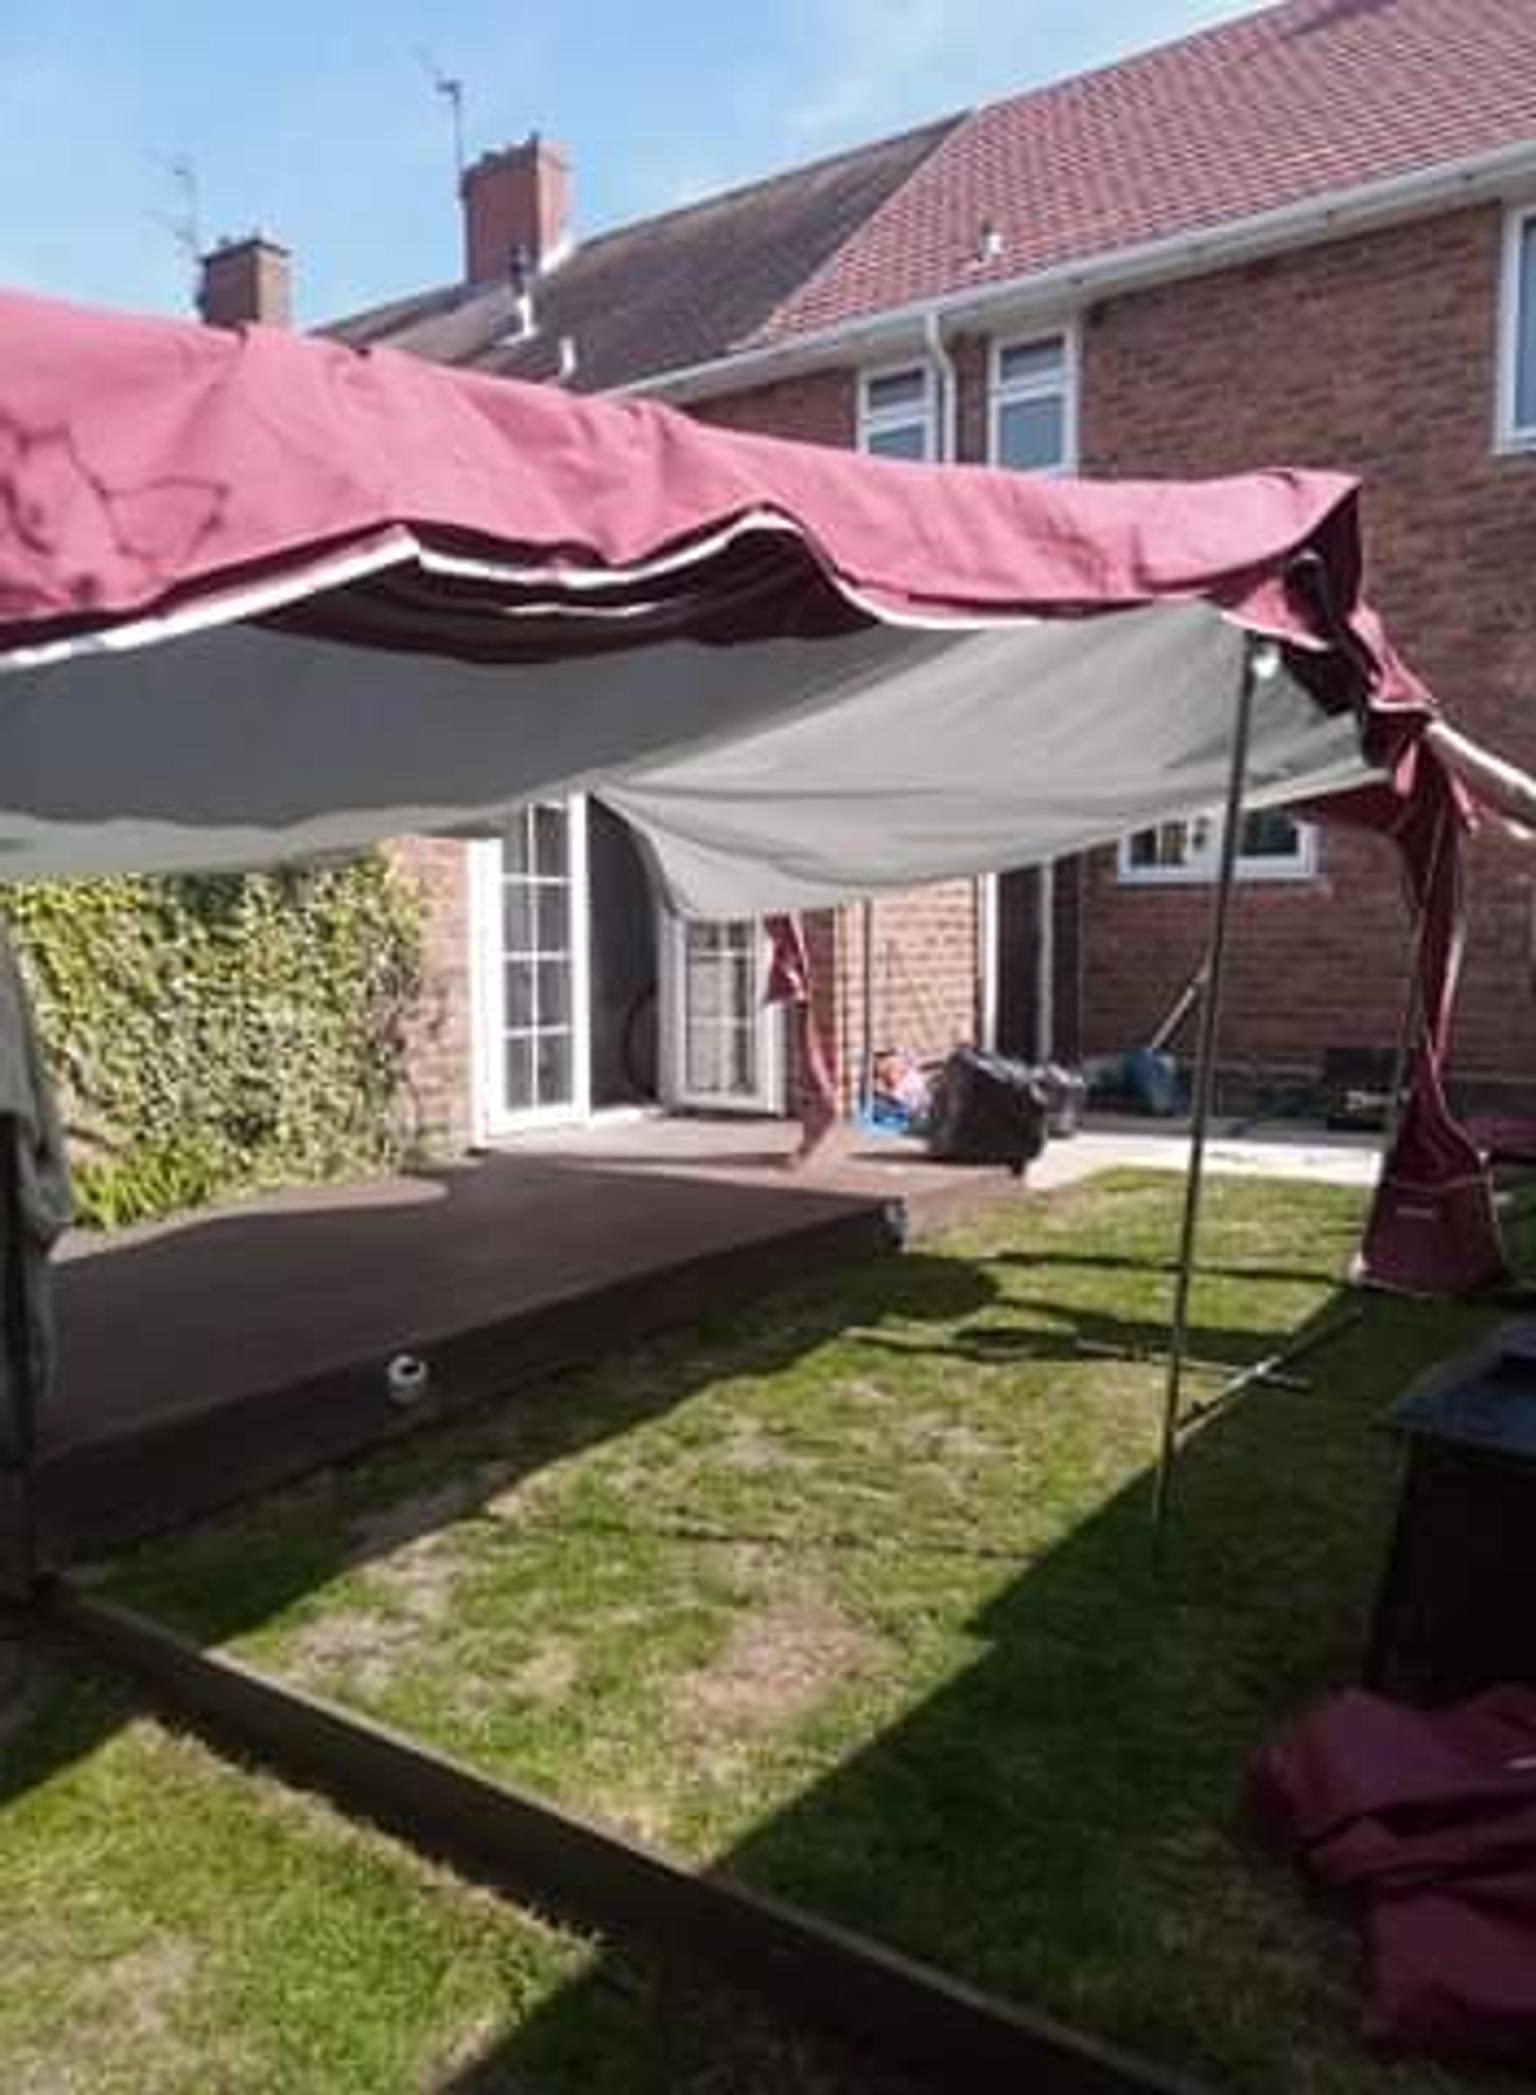 Caravan Awning In Wolverhampton For 265 00 For Sale Shpock